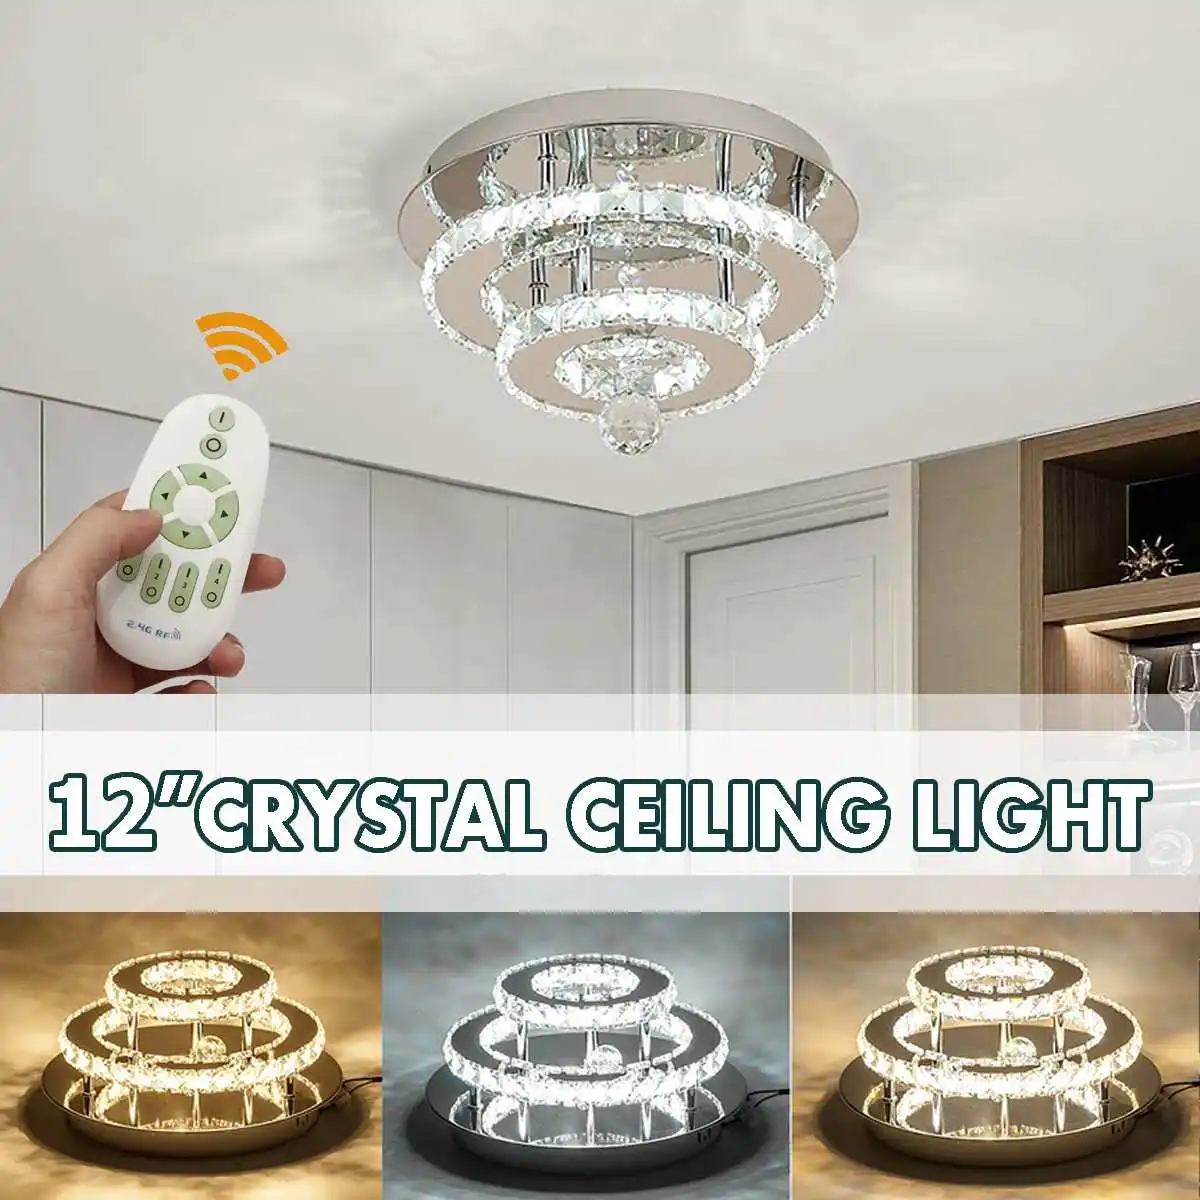 30cm Crystal Dimmable LED Ceiling Light With Remote Control Hallyway Ceiling Lamps Indoor Lighting Fixture Home Decor 165V-265V